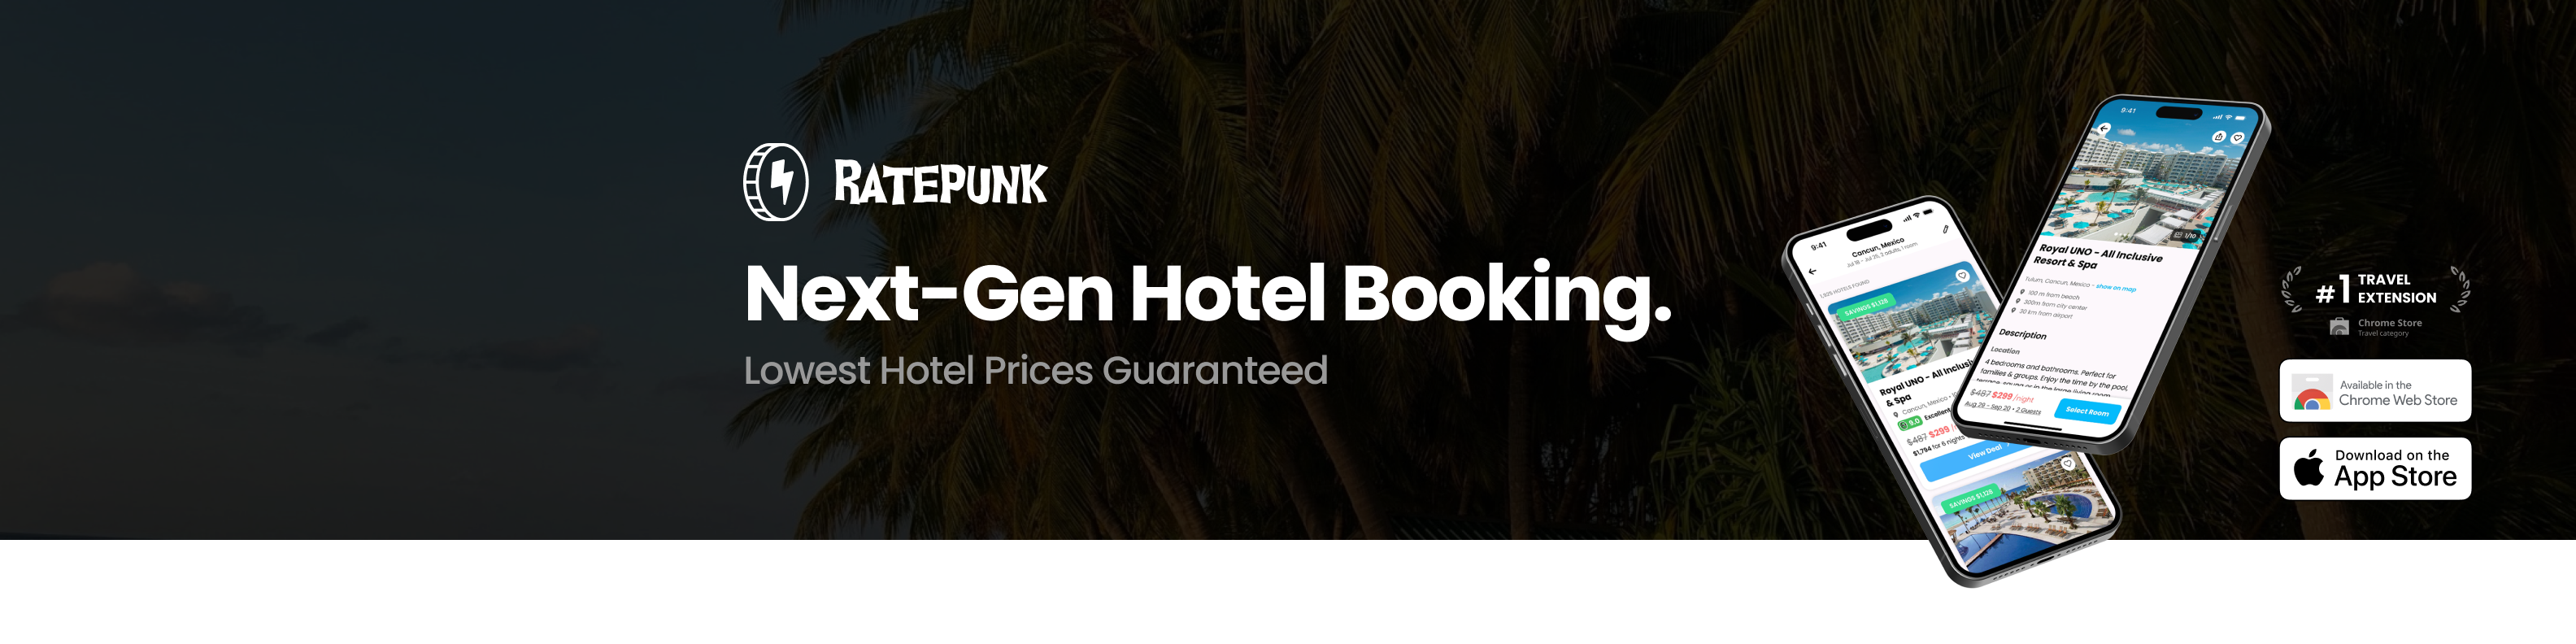 ratepunk next gen hotel booking lowest hotel price guaranteed 